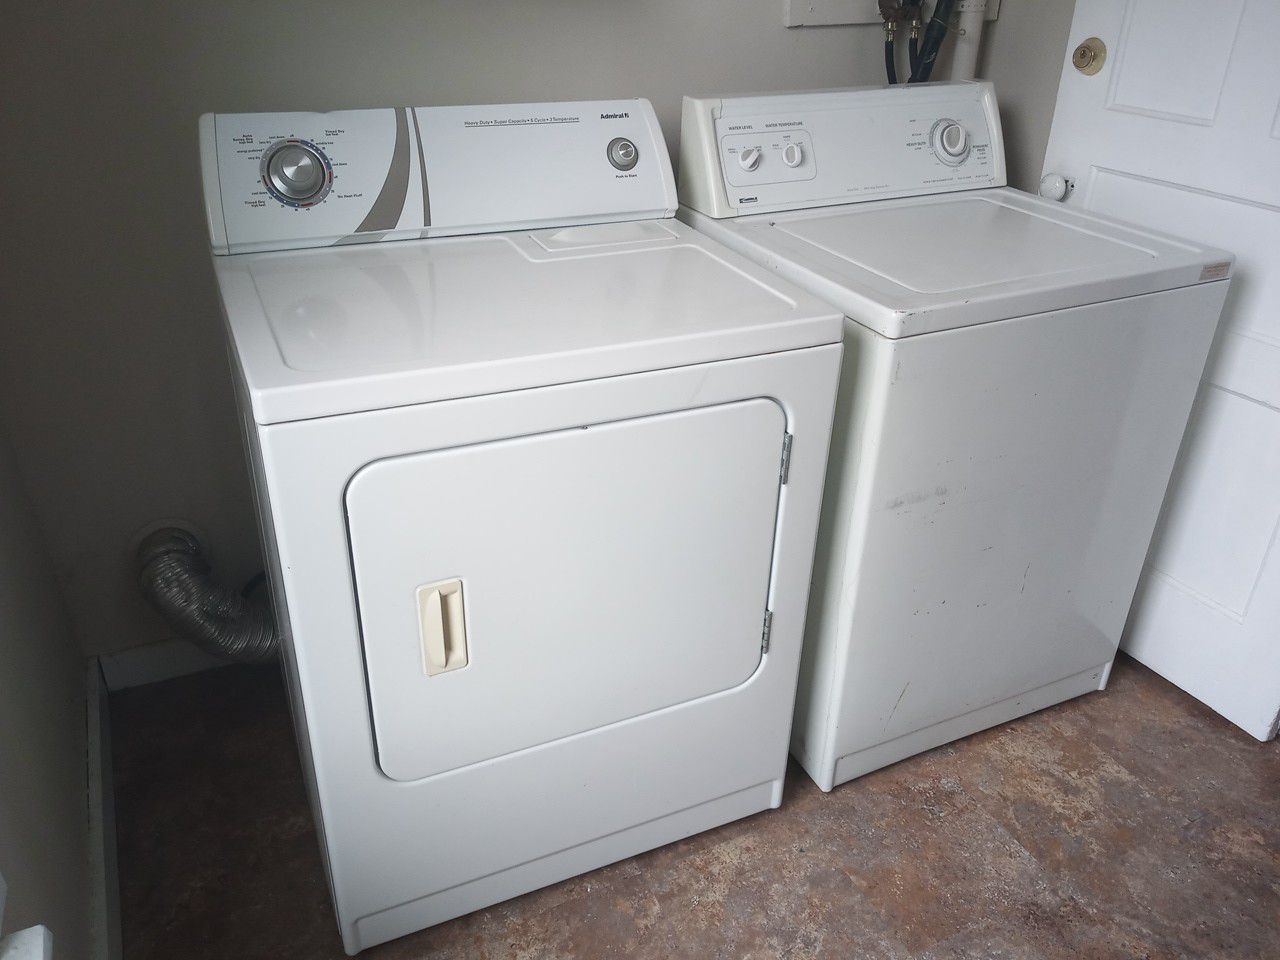 Washer & Dryer in Like New Working Condition.